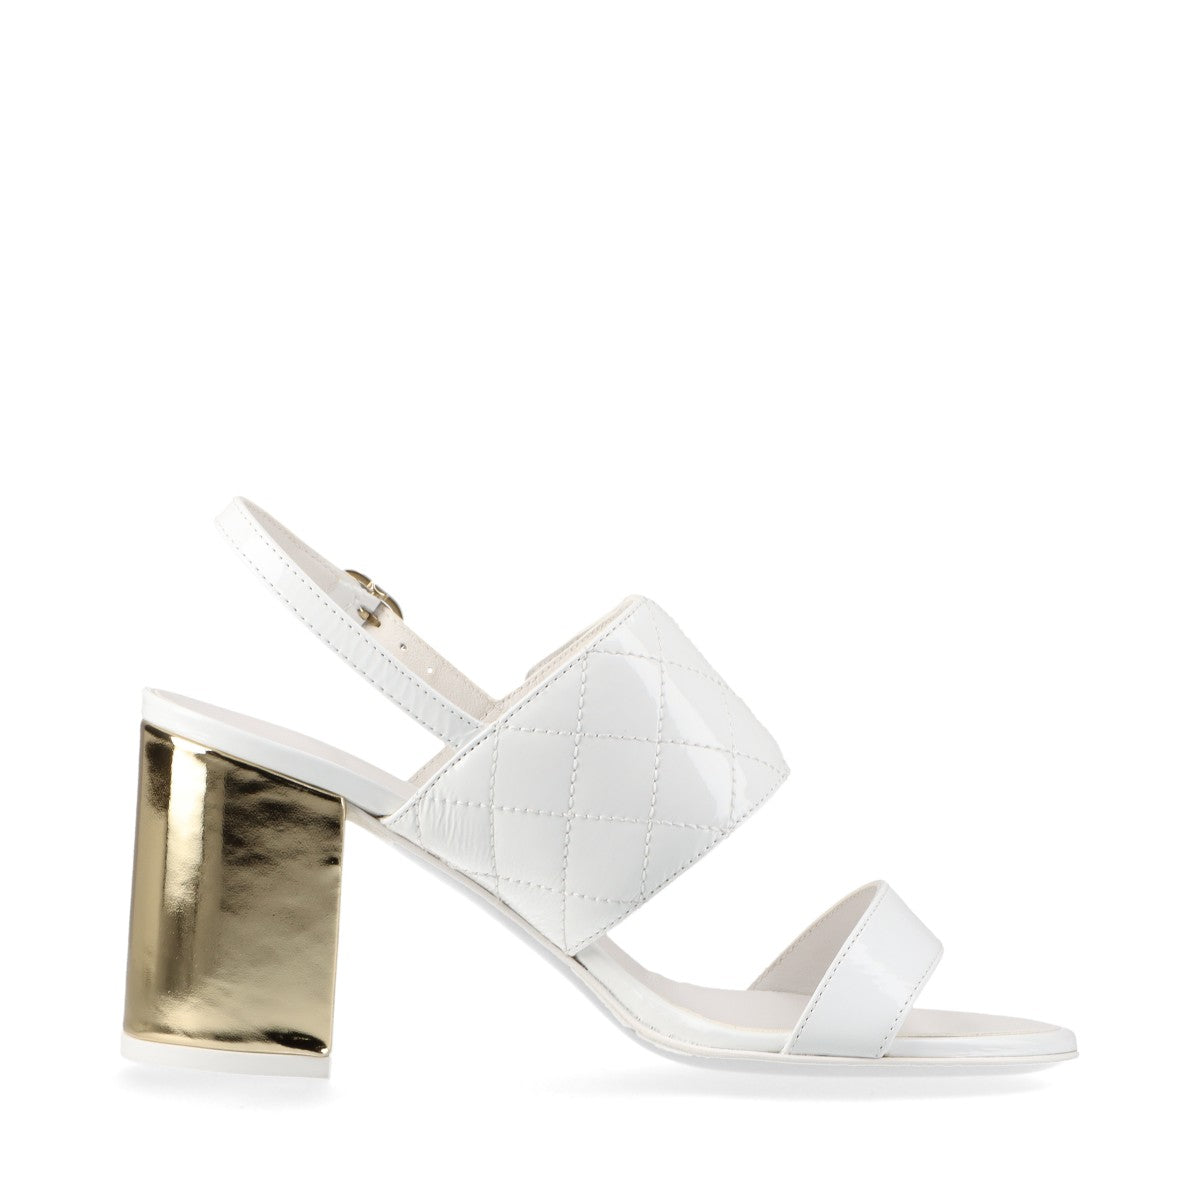 Chanel Coco Mark 23P Patent Leather Sandals 35C Ladies' White x gold G39730 Matelasse Strap Box There is a storage bag